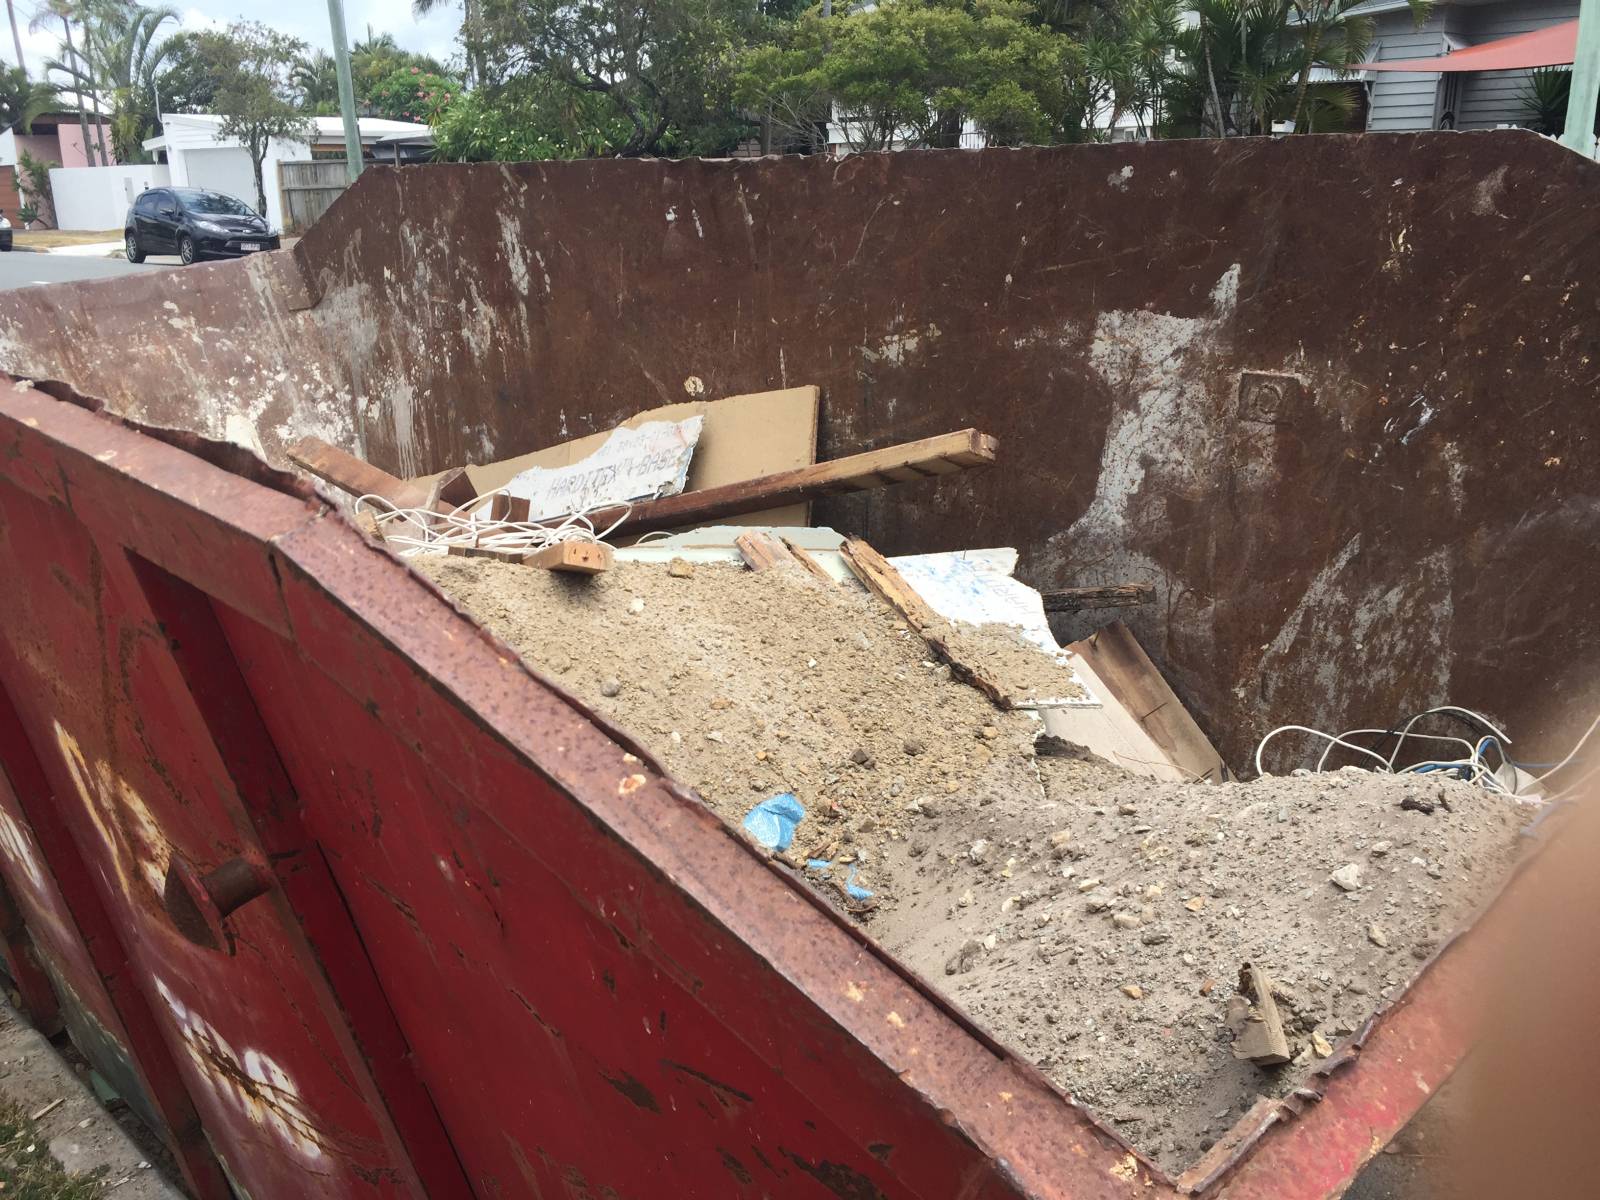 Safety Tips and Advice for Skip Bins